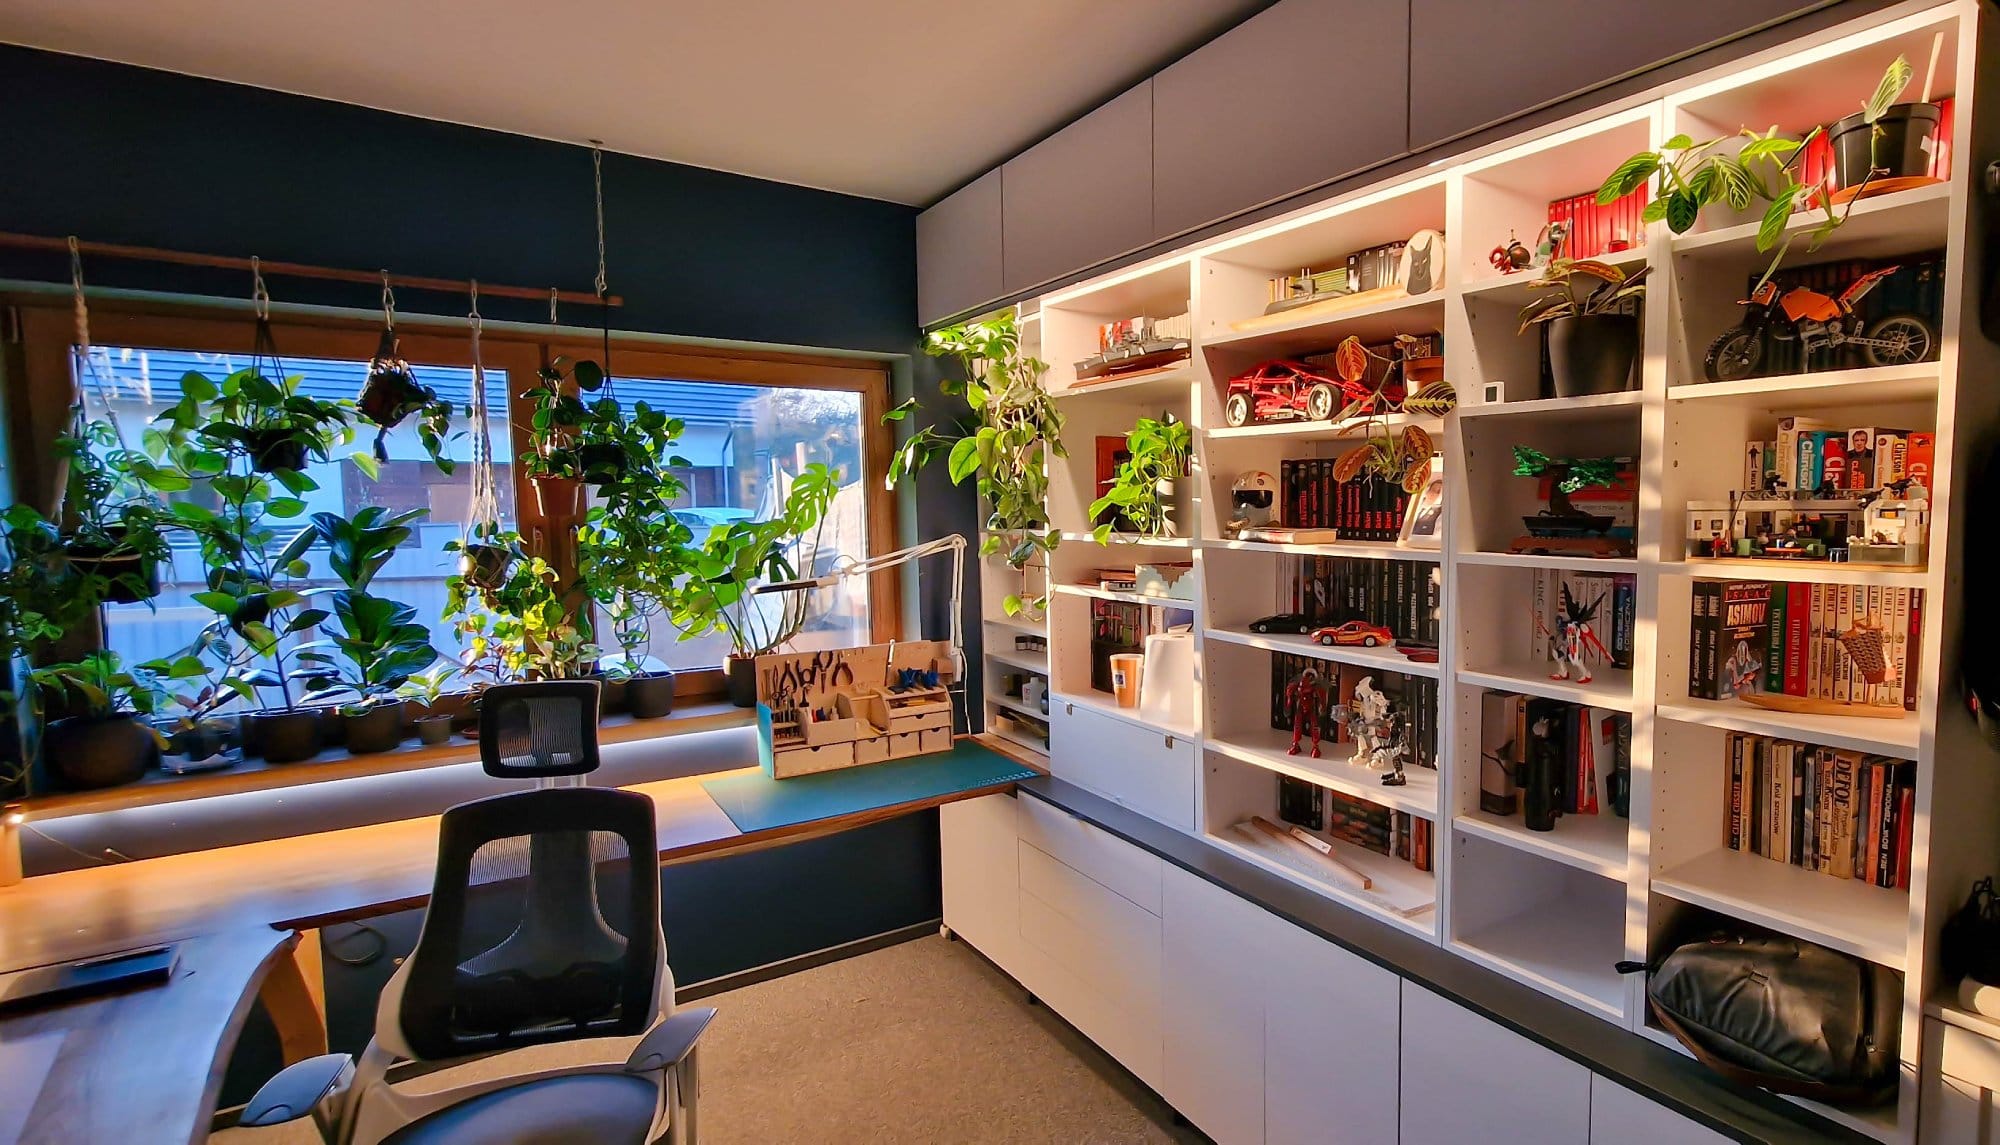 A modern home office with large windows draped with green plants, an ergonomic chair facing a desk with crafting tools, and extensive white shelving filled with books, models, and collectibles